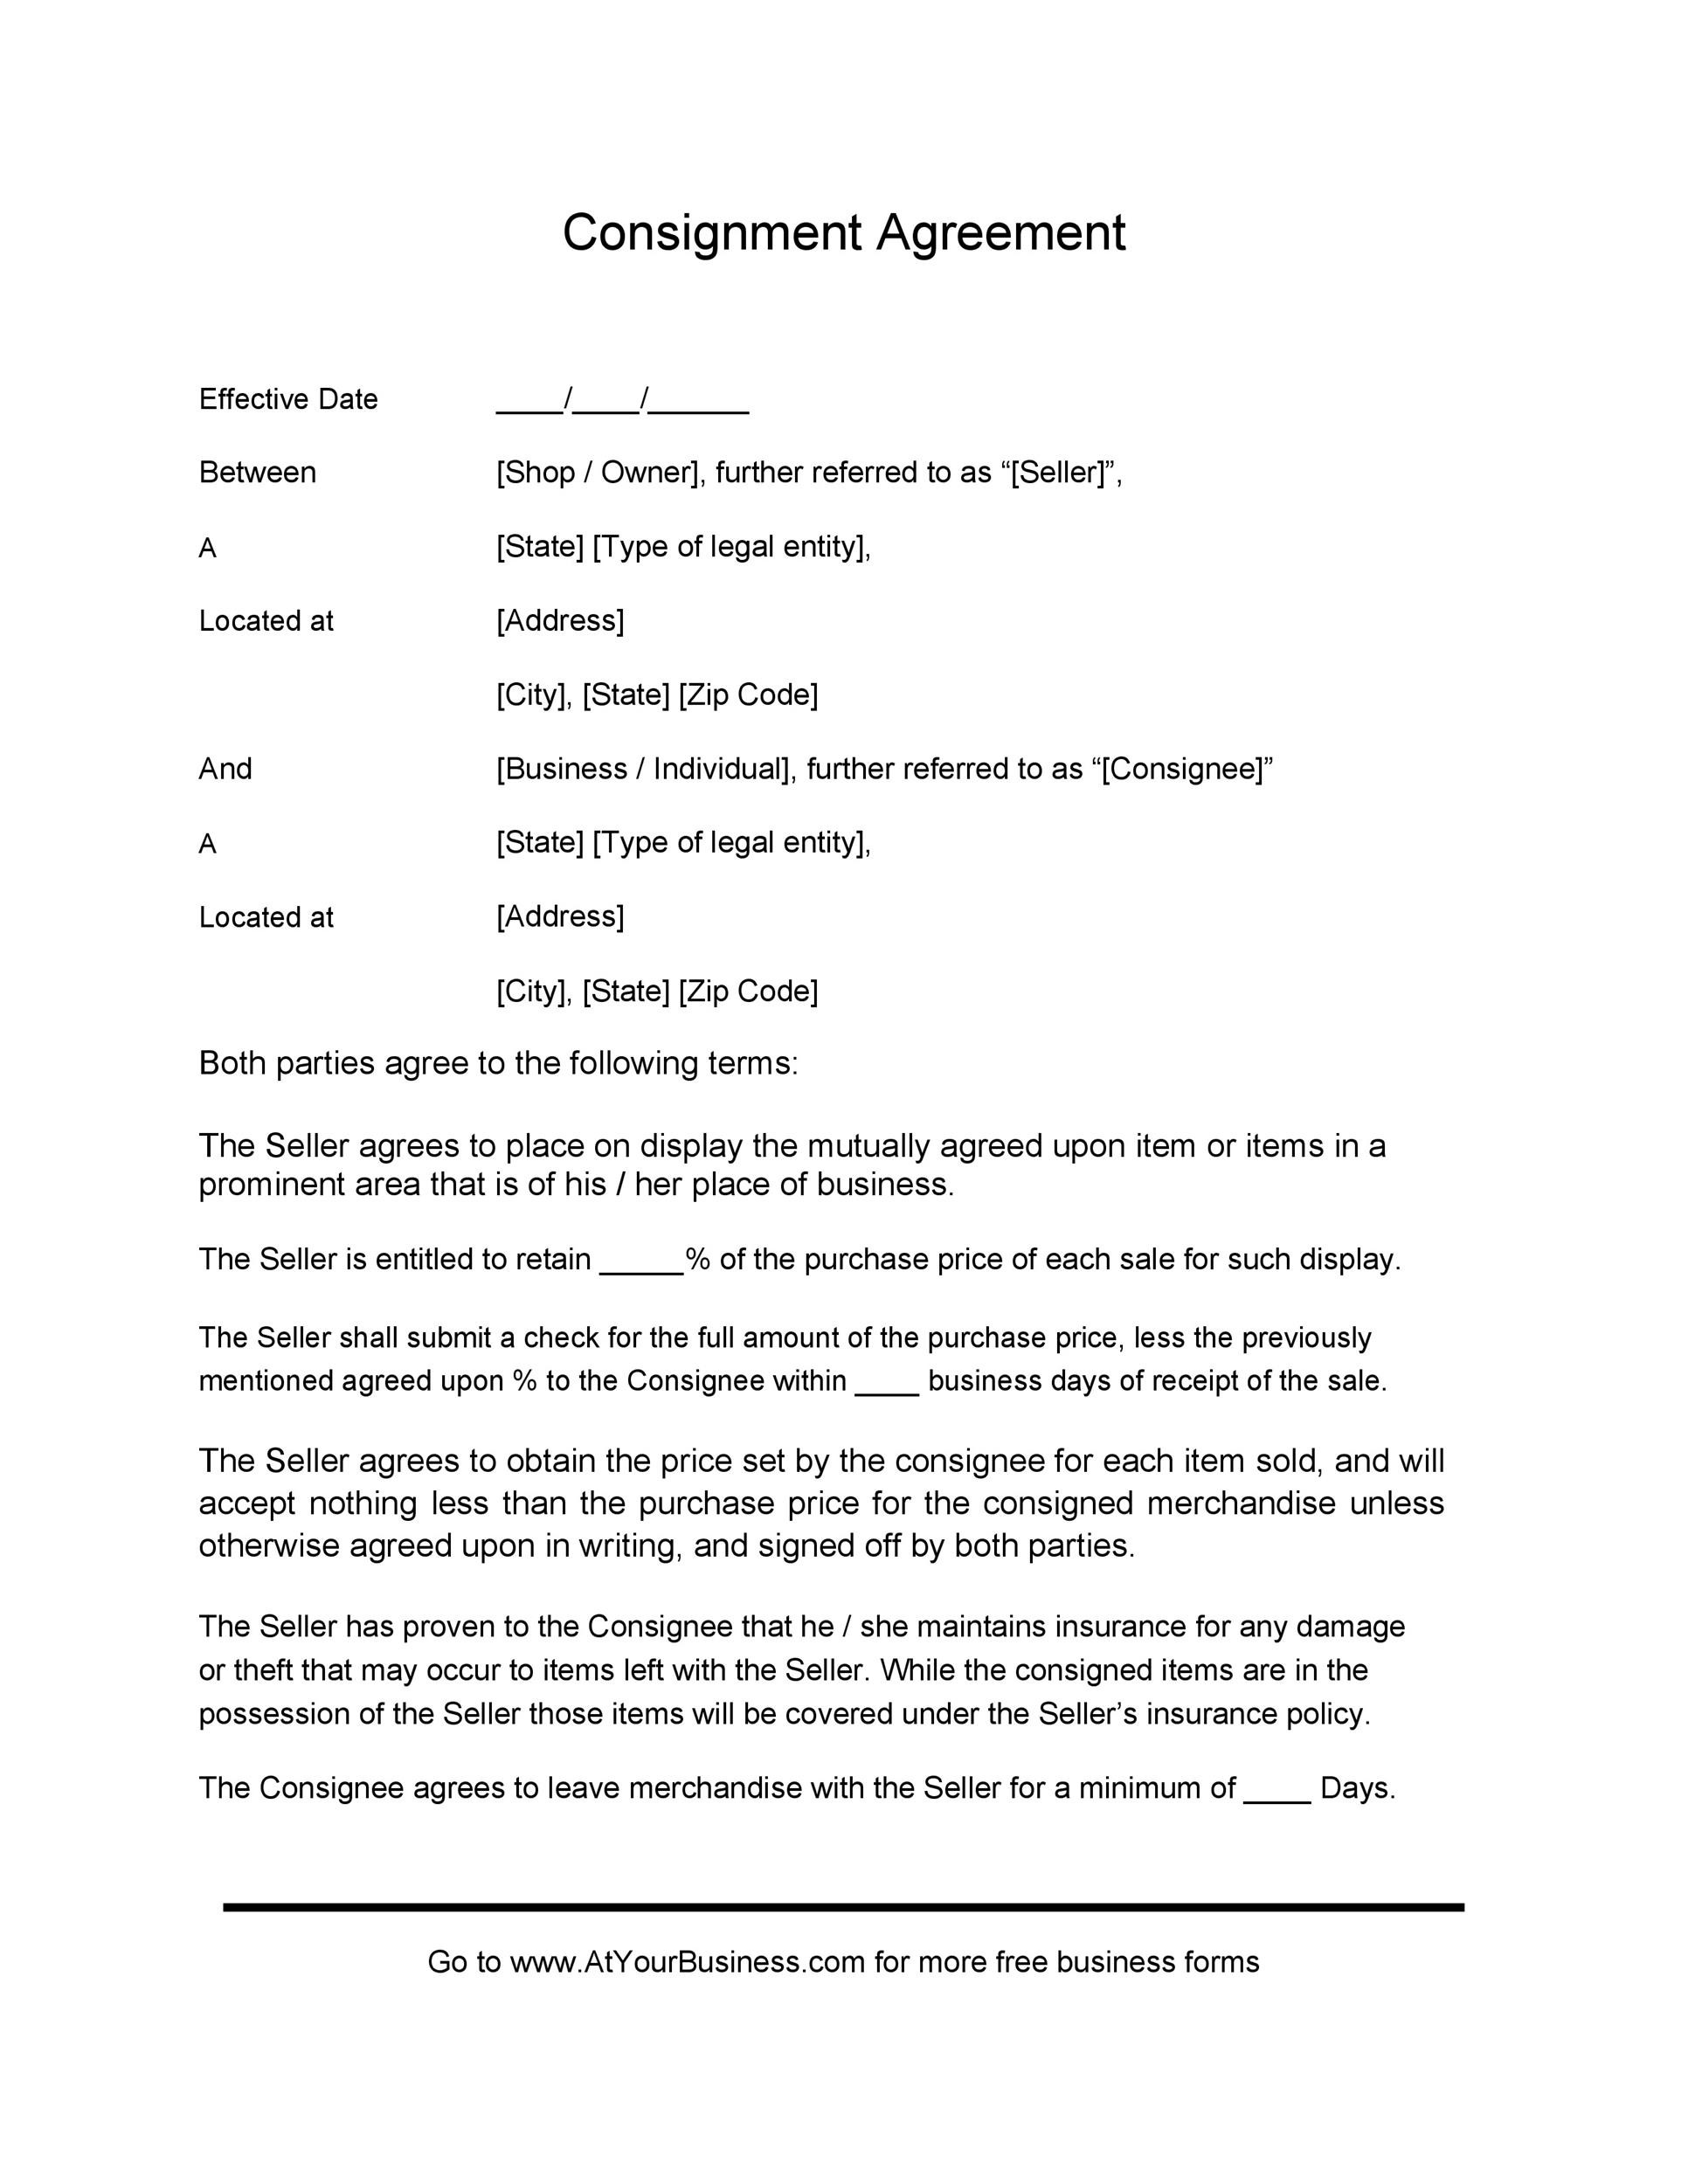 Free Consignment Agreement Template 08